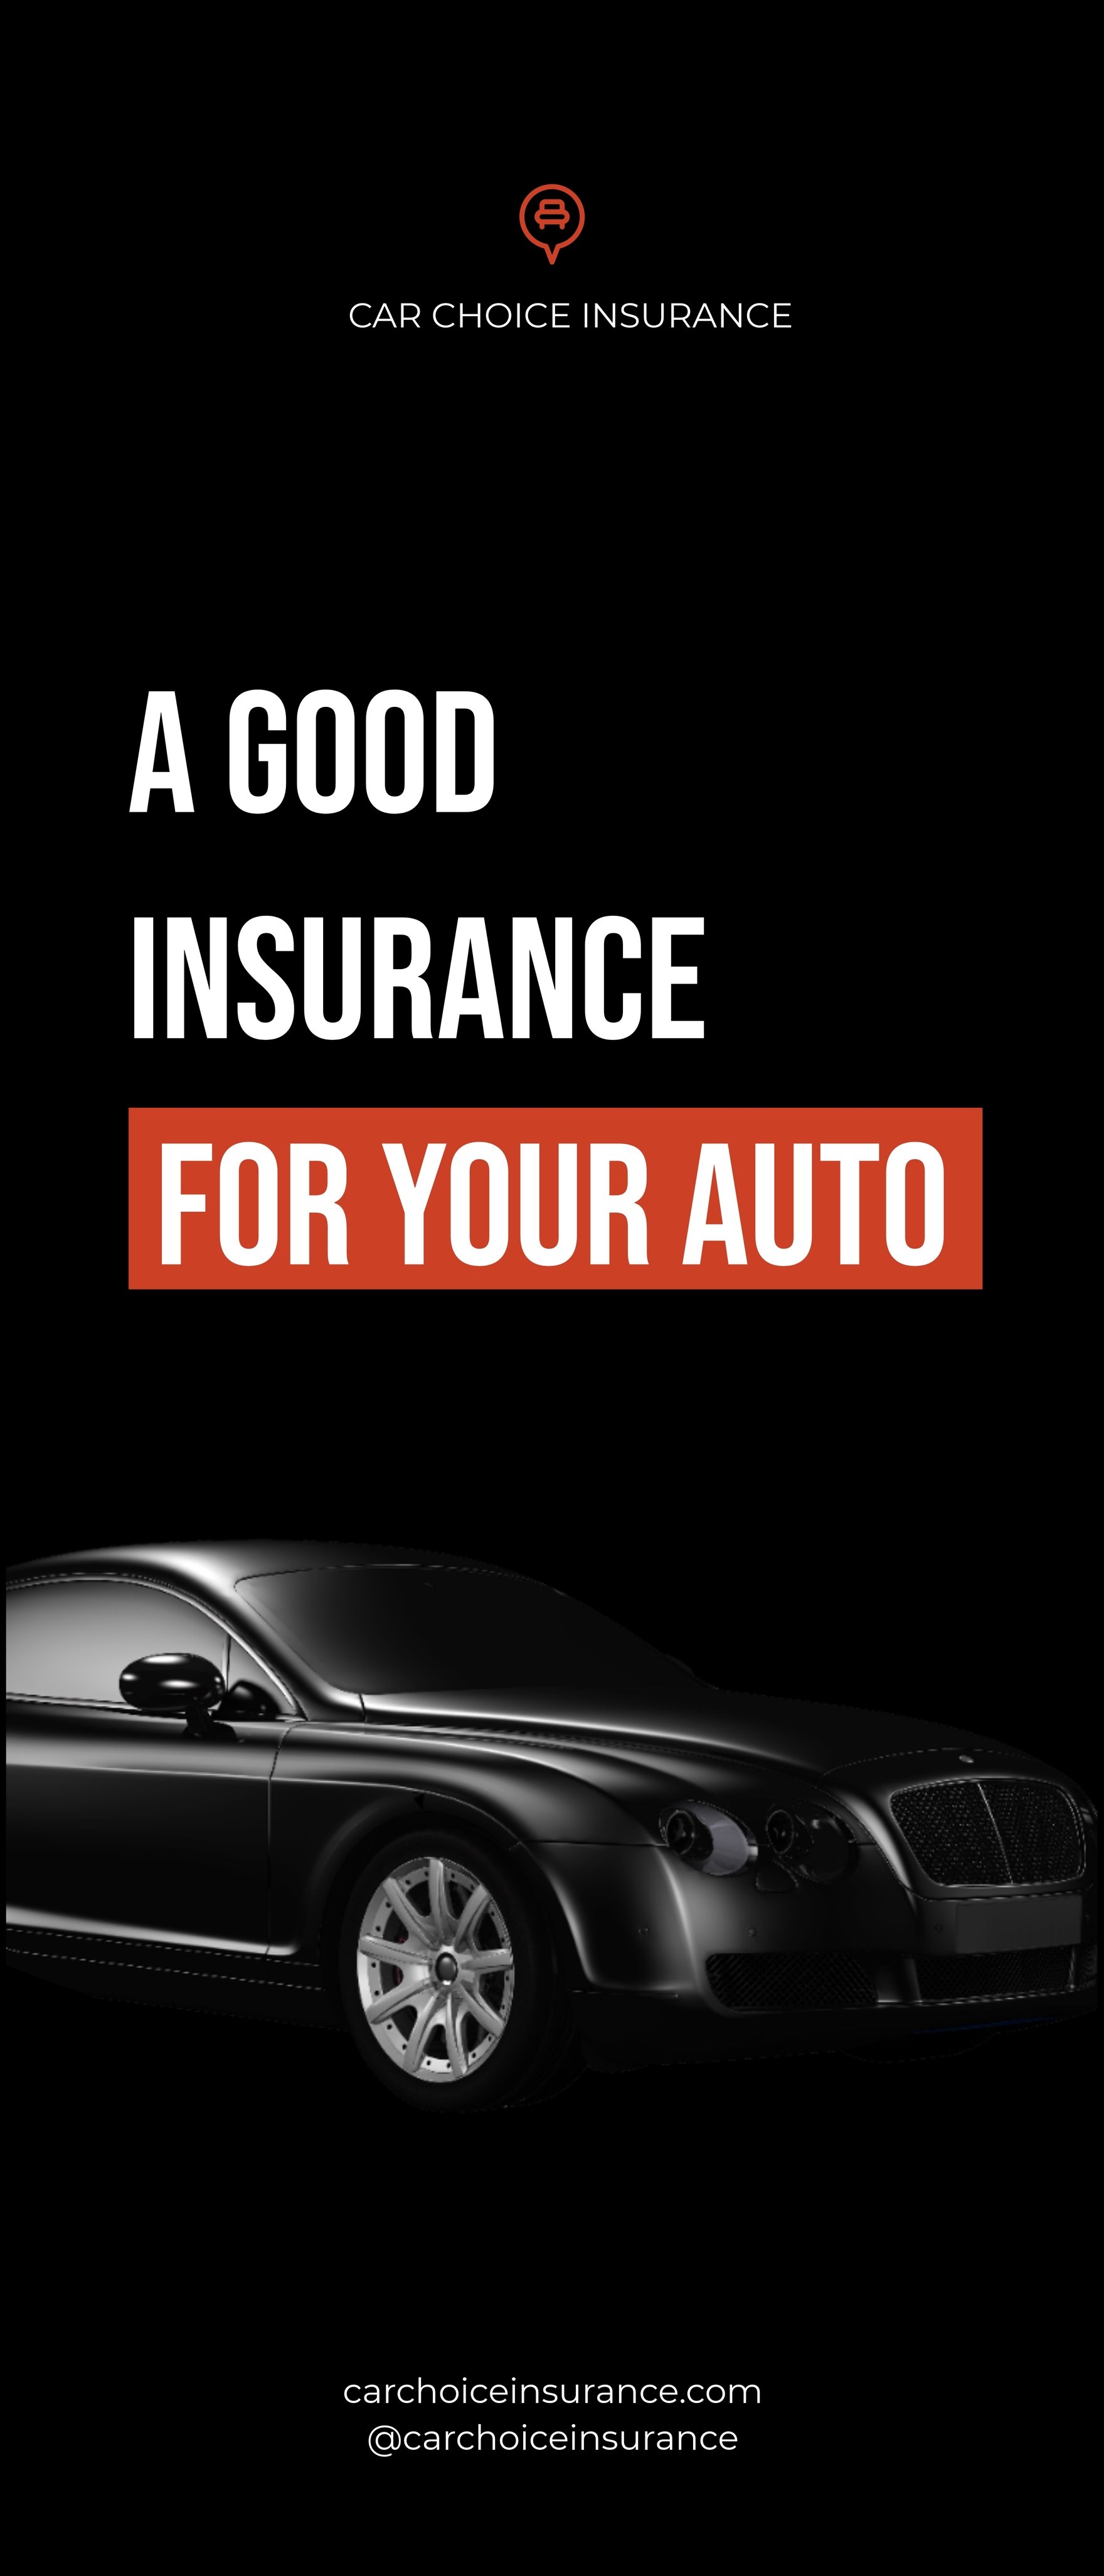 Auto Insurance Rollup Banner Template in Word, Google Docs, Apple Pages, Publisher